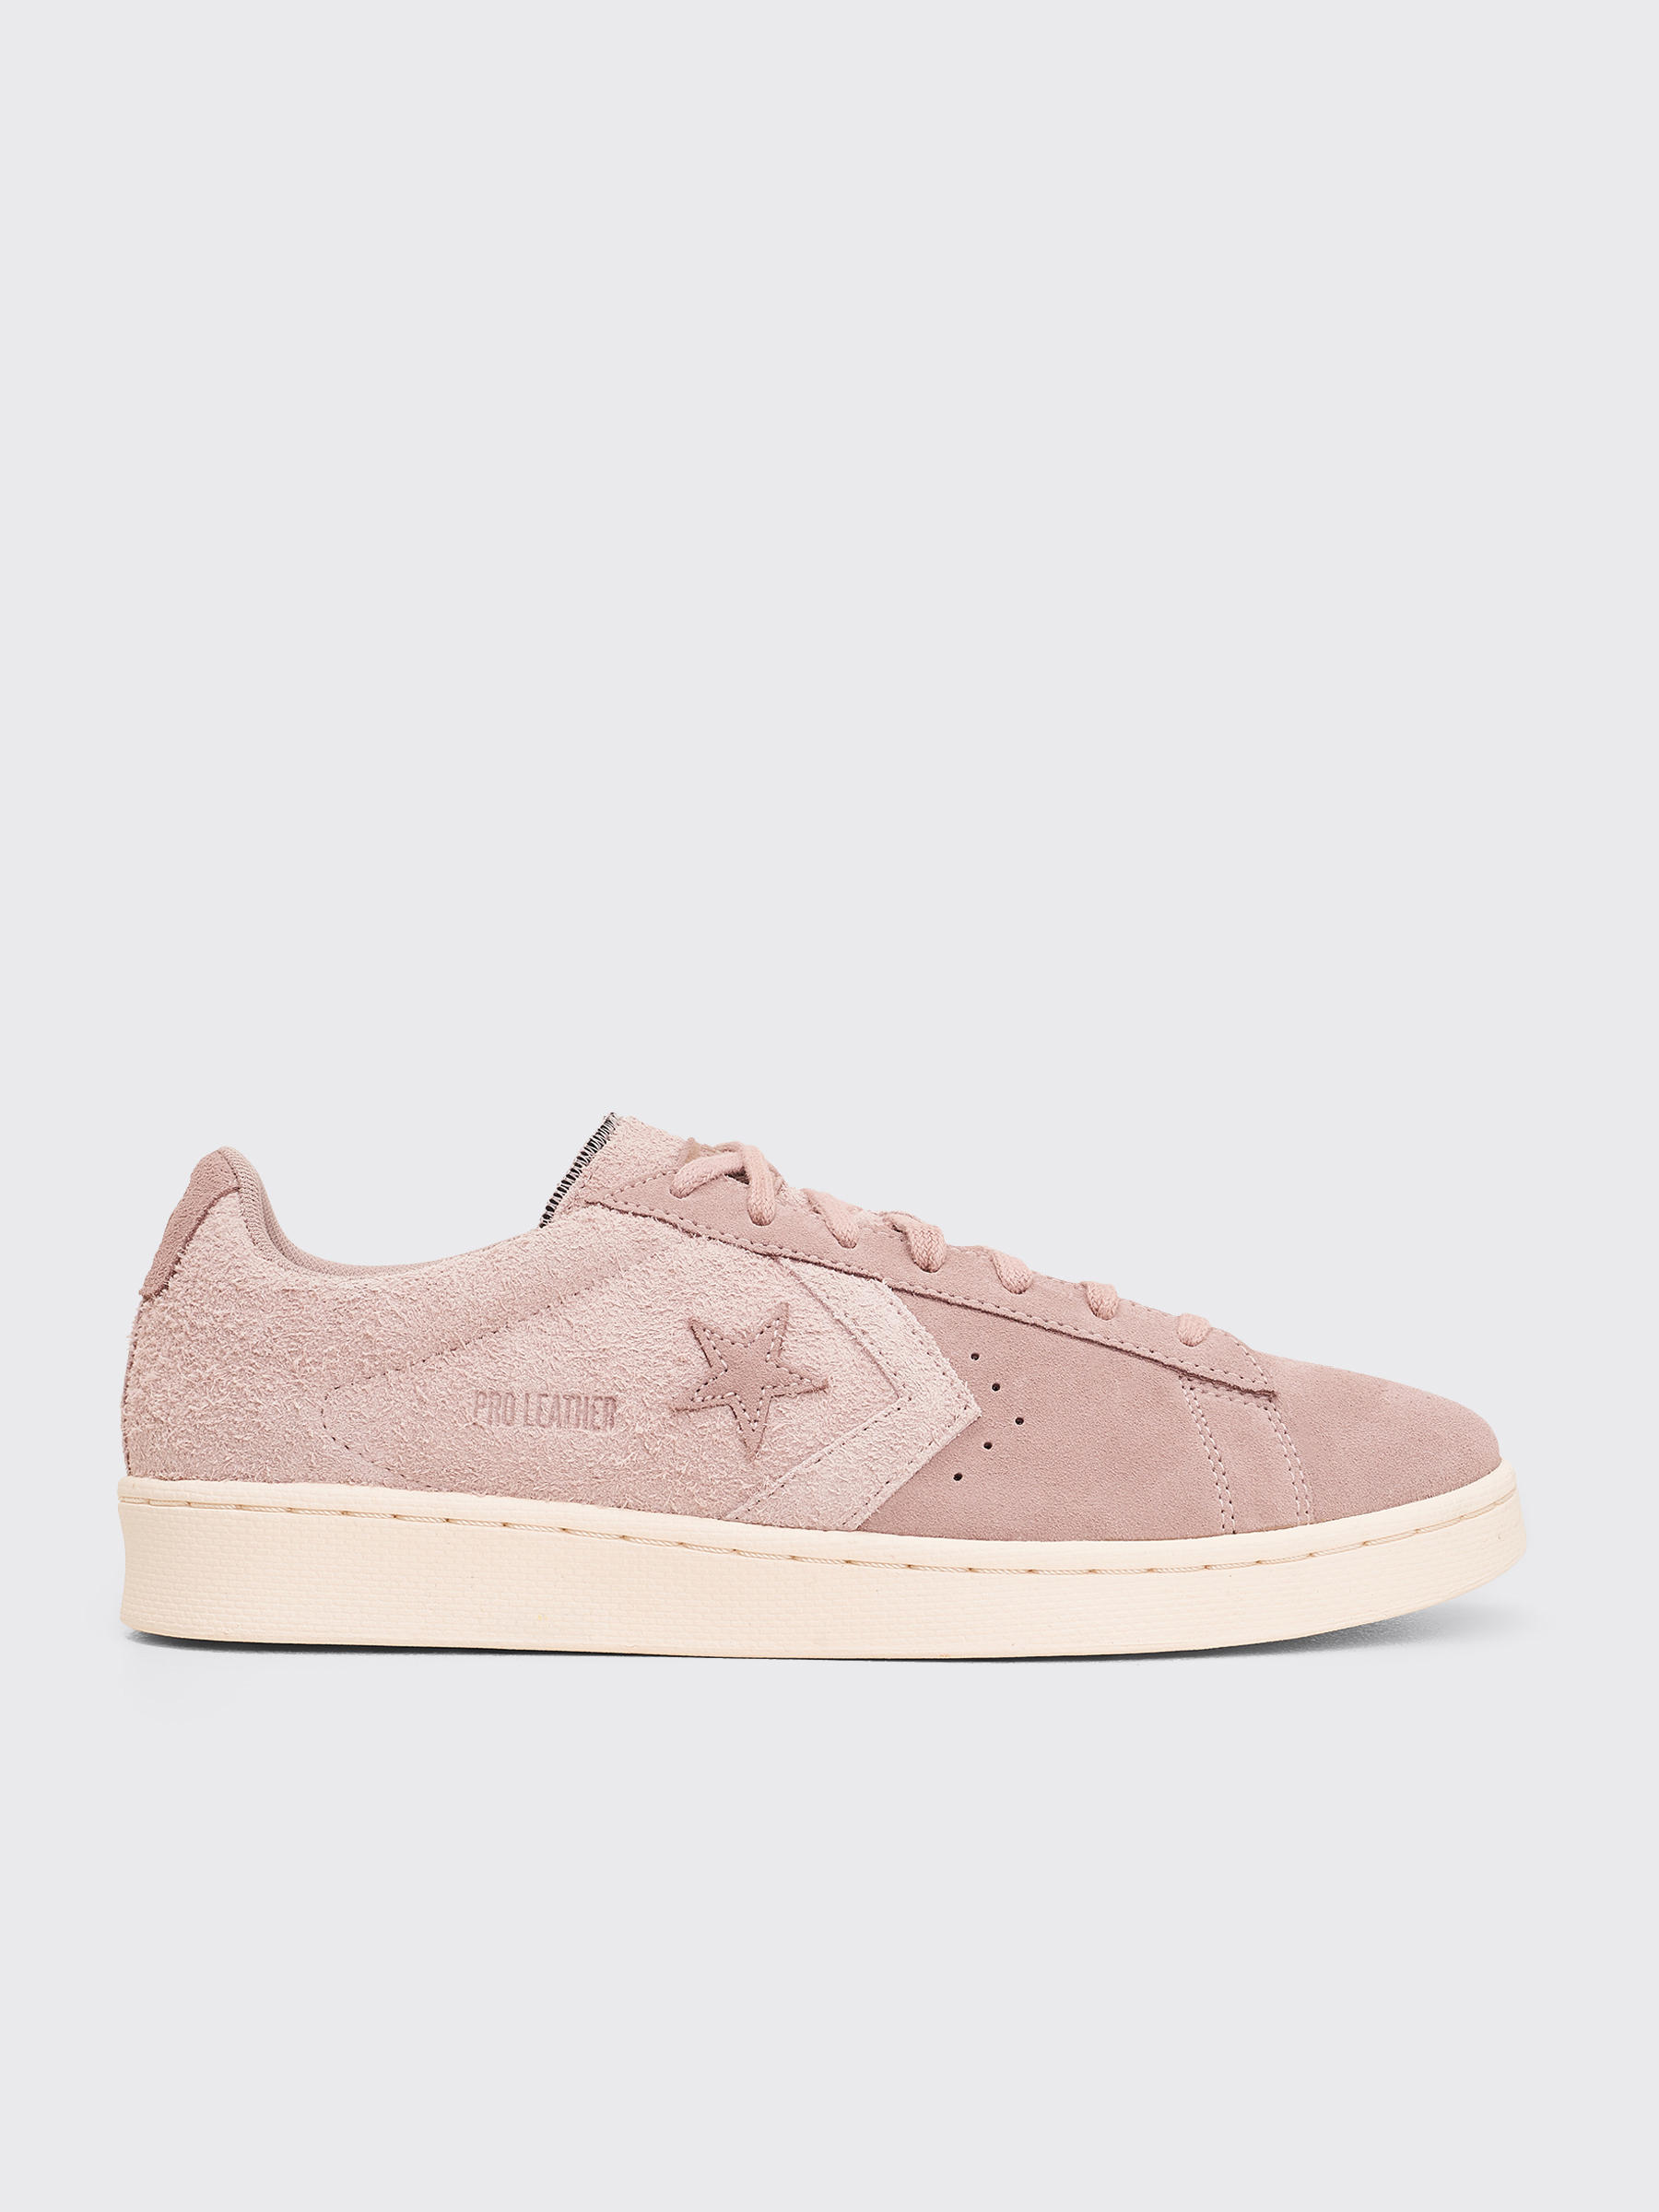 converse suede leather